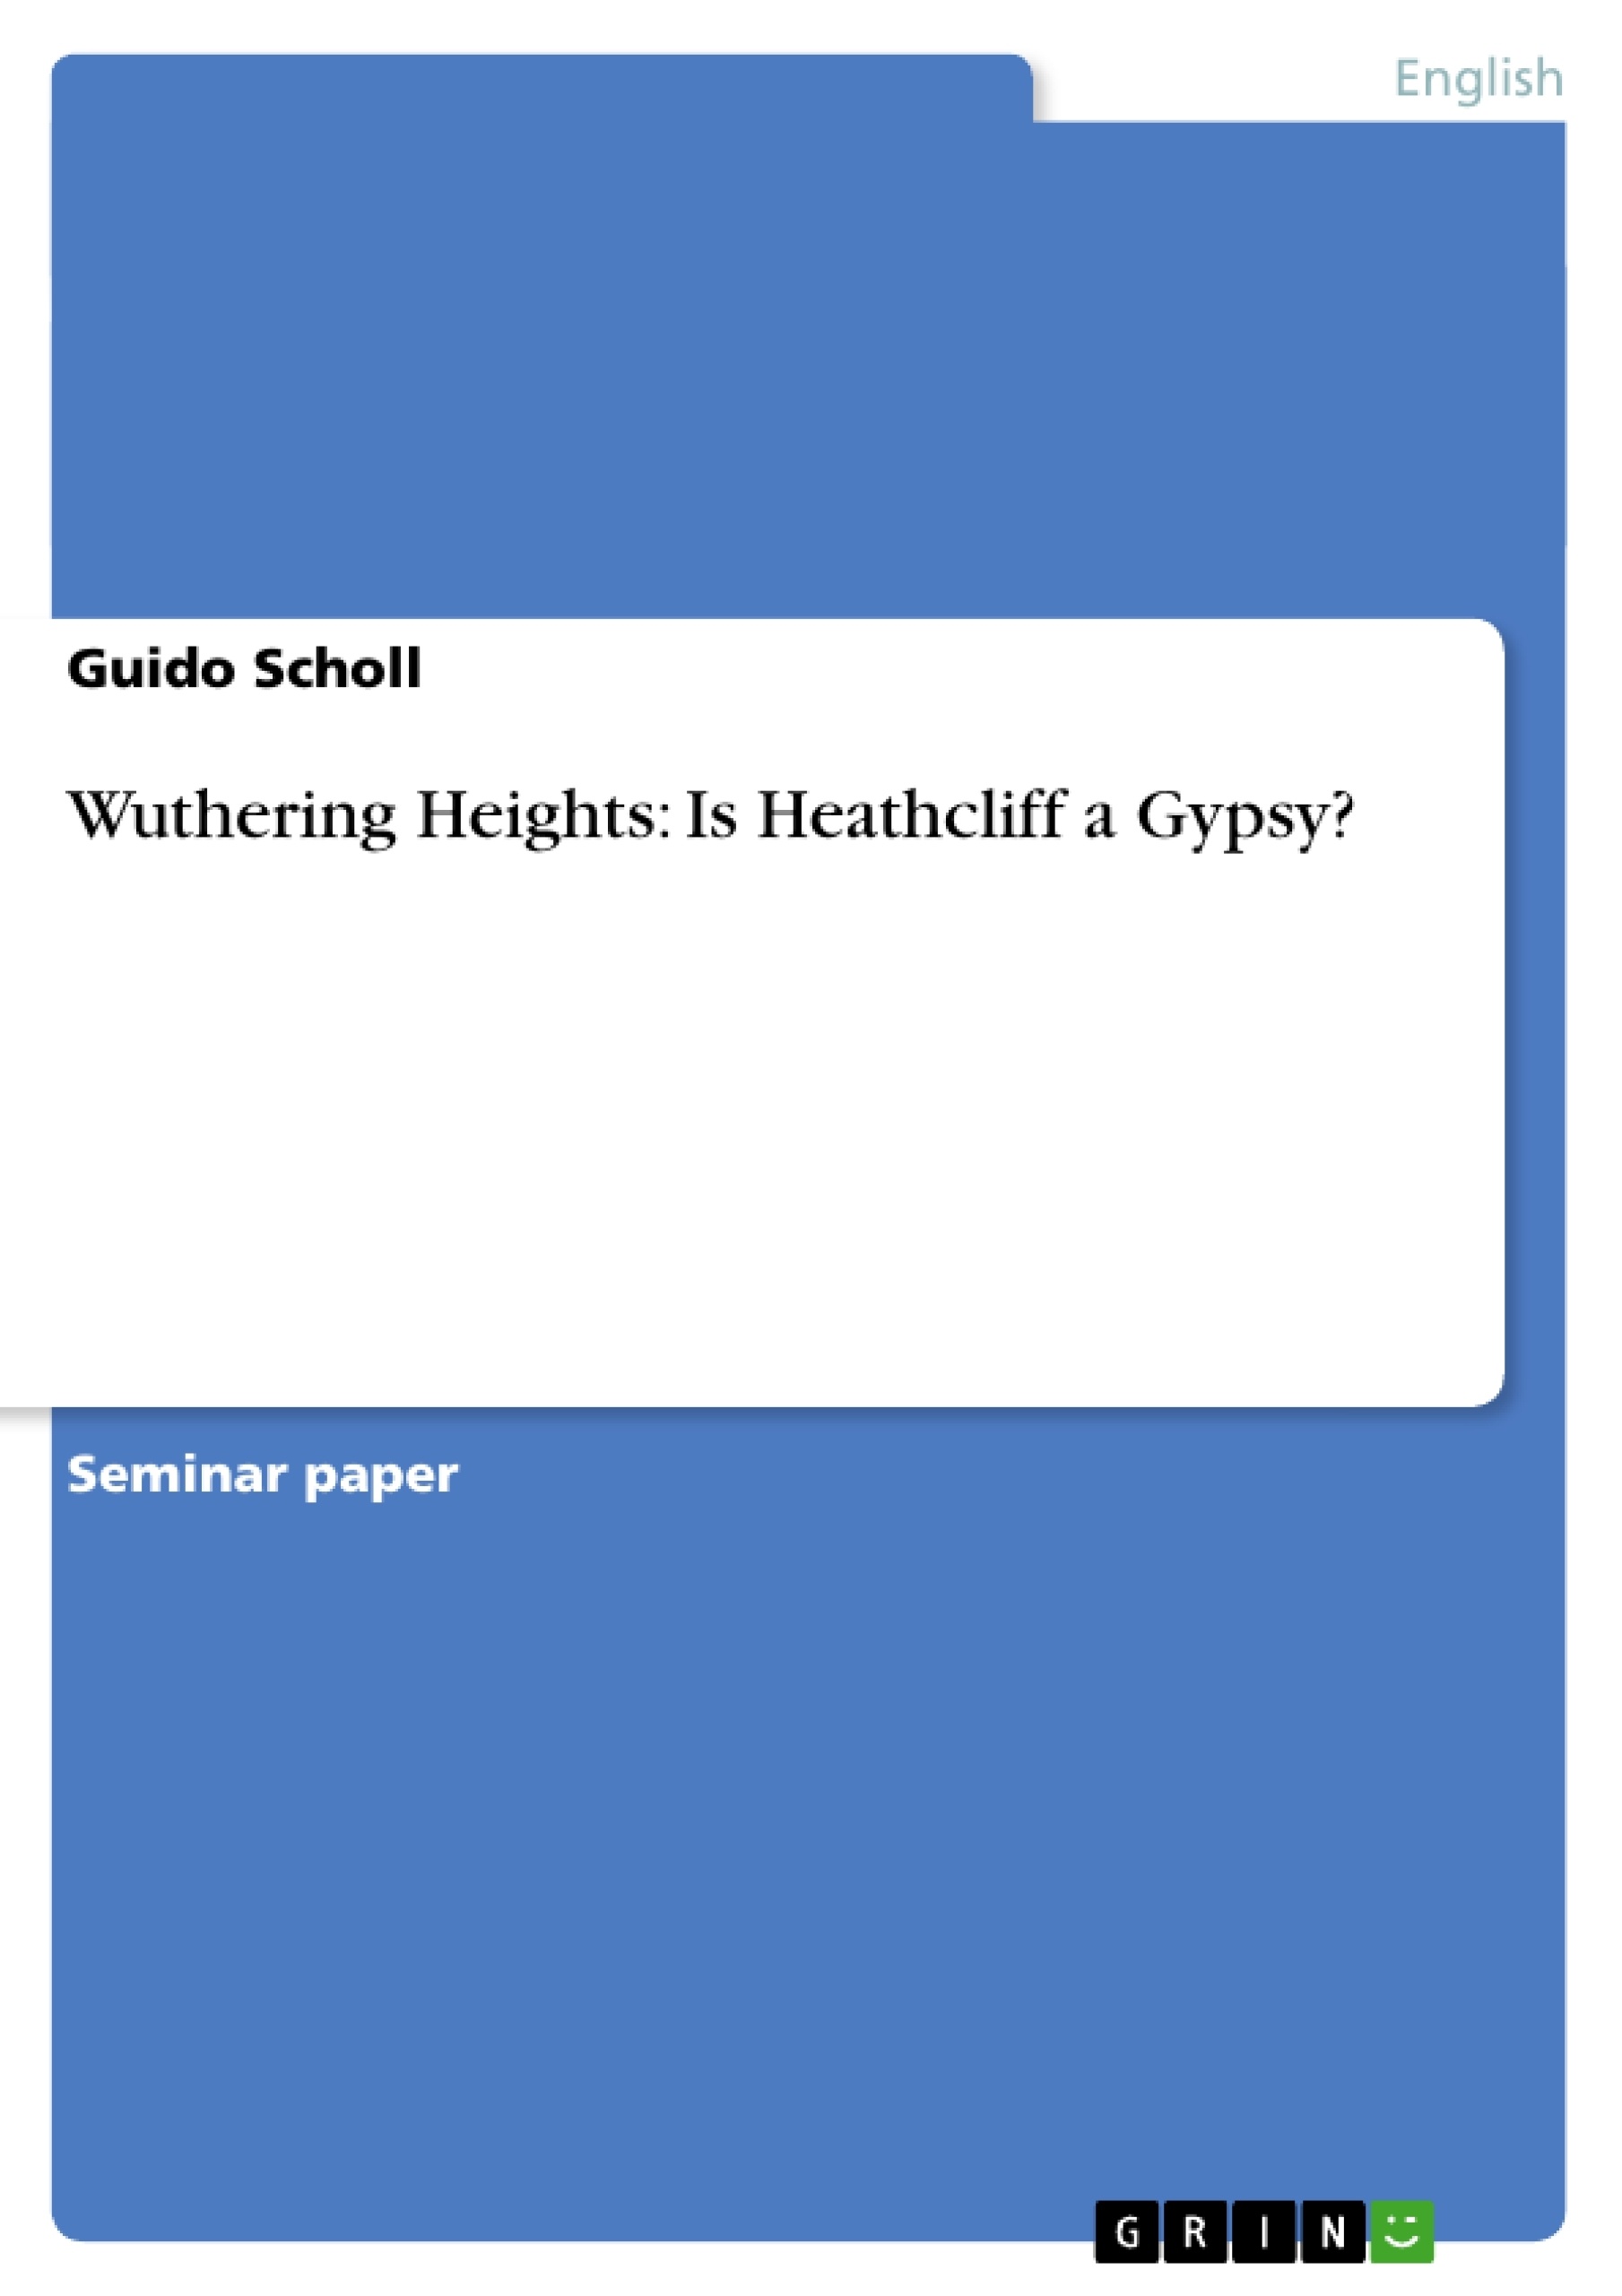 Title: Wuthering Heights: Is Heathcliff a Gypsy?